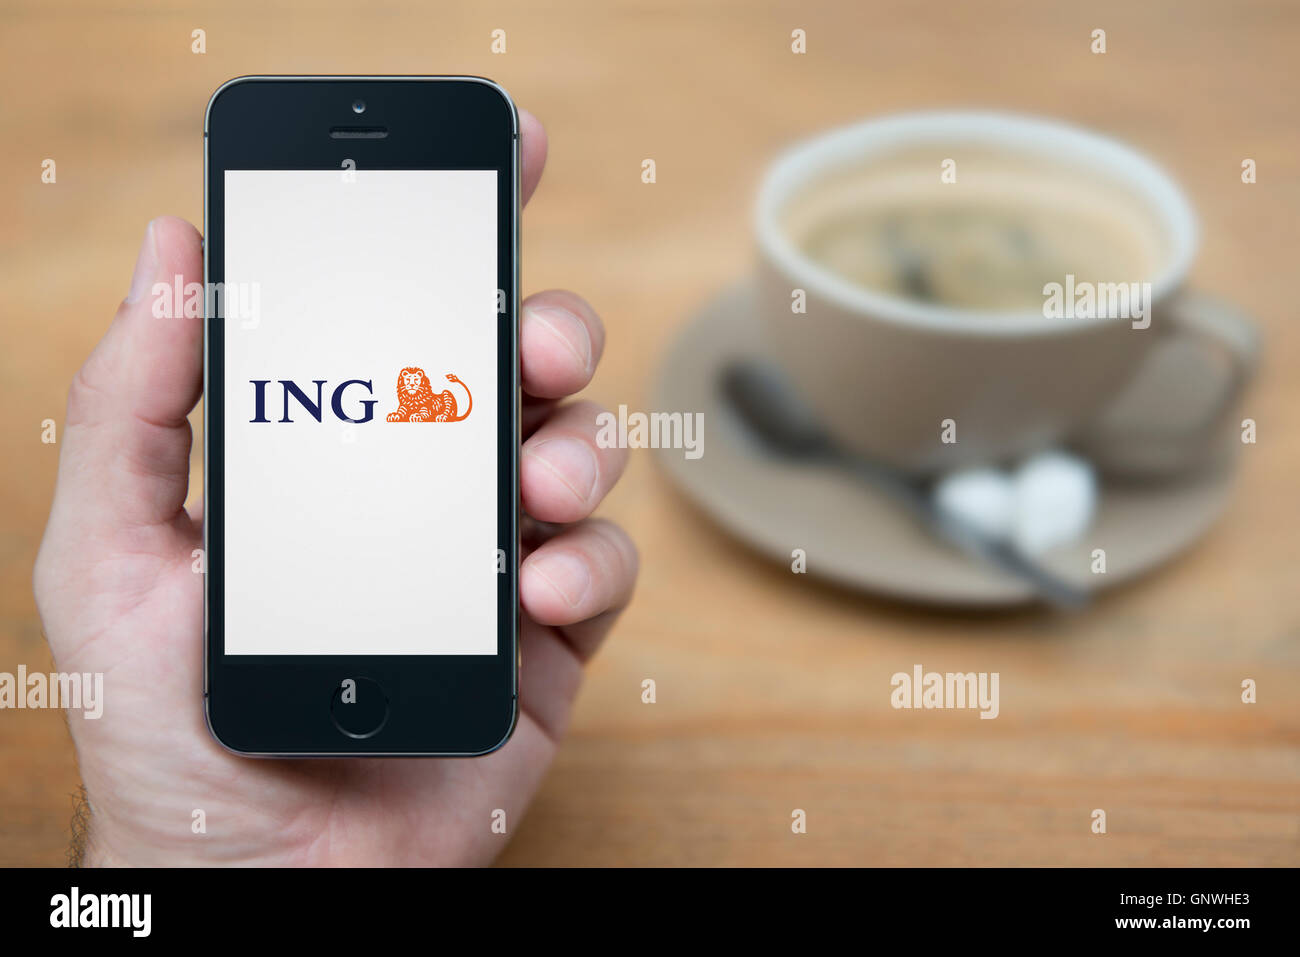 A man looks at his iPhone which displays the ING bank logo, while sat with a cup of coffee (Editorial use only). Stock Photo